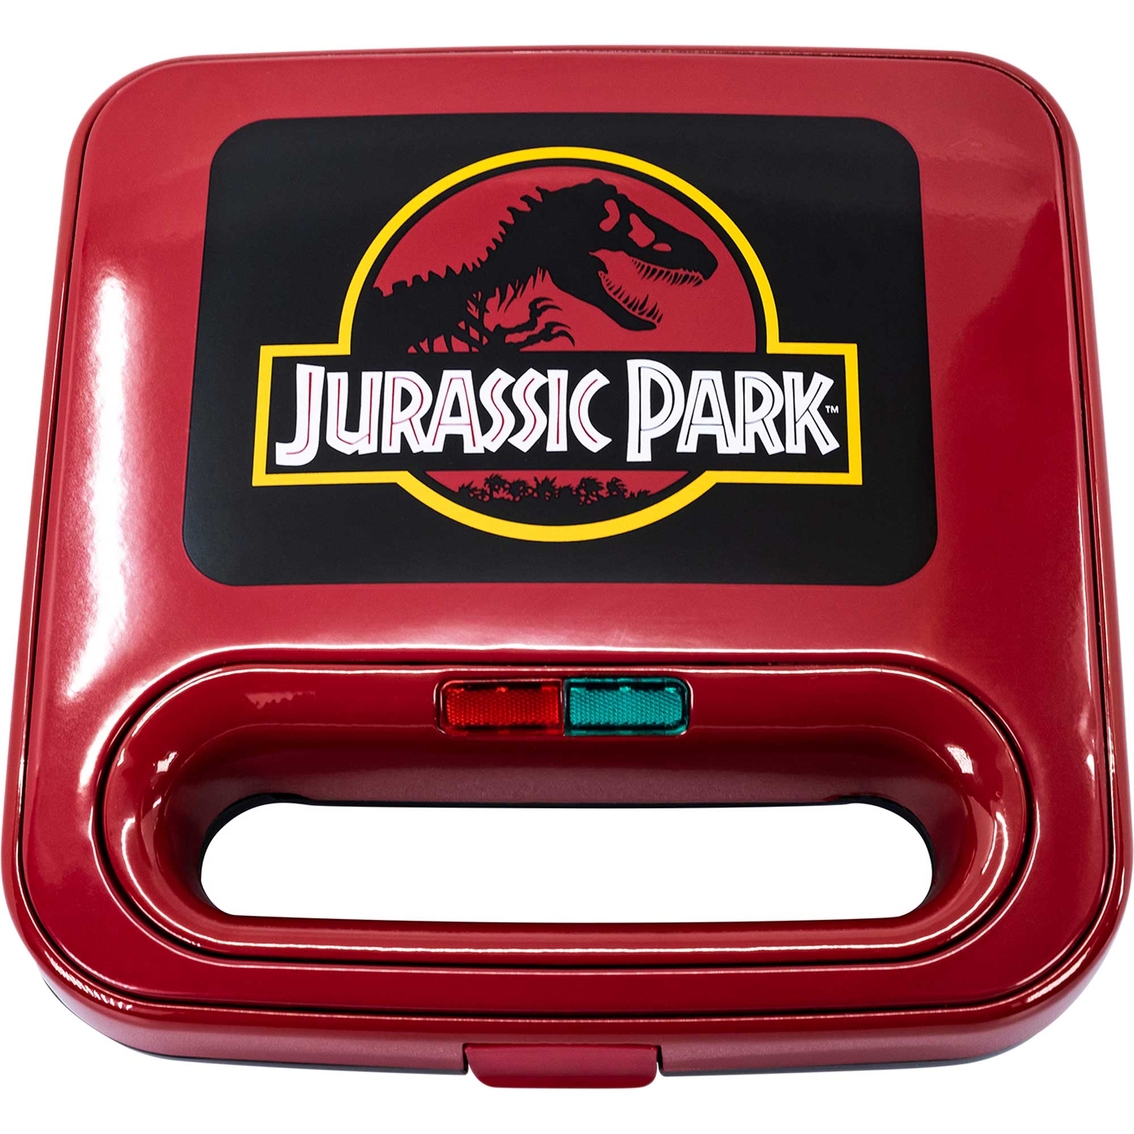 Jurassic Park Grilled Cheese Maker - Image 2 of 6